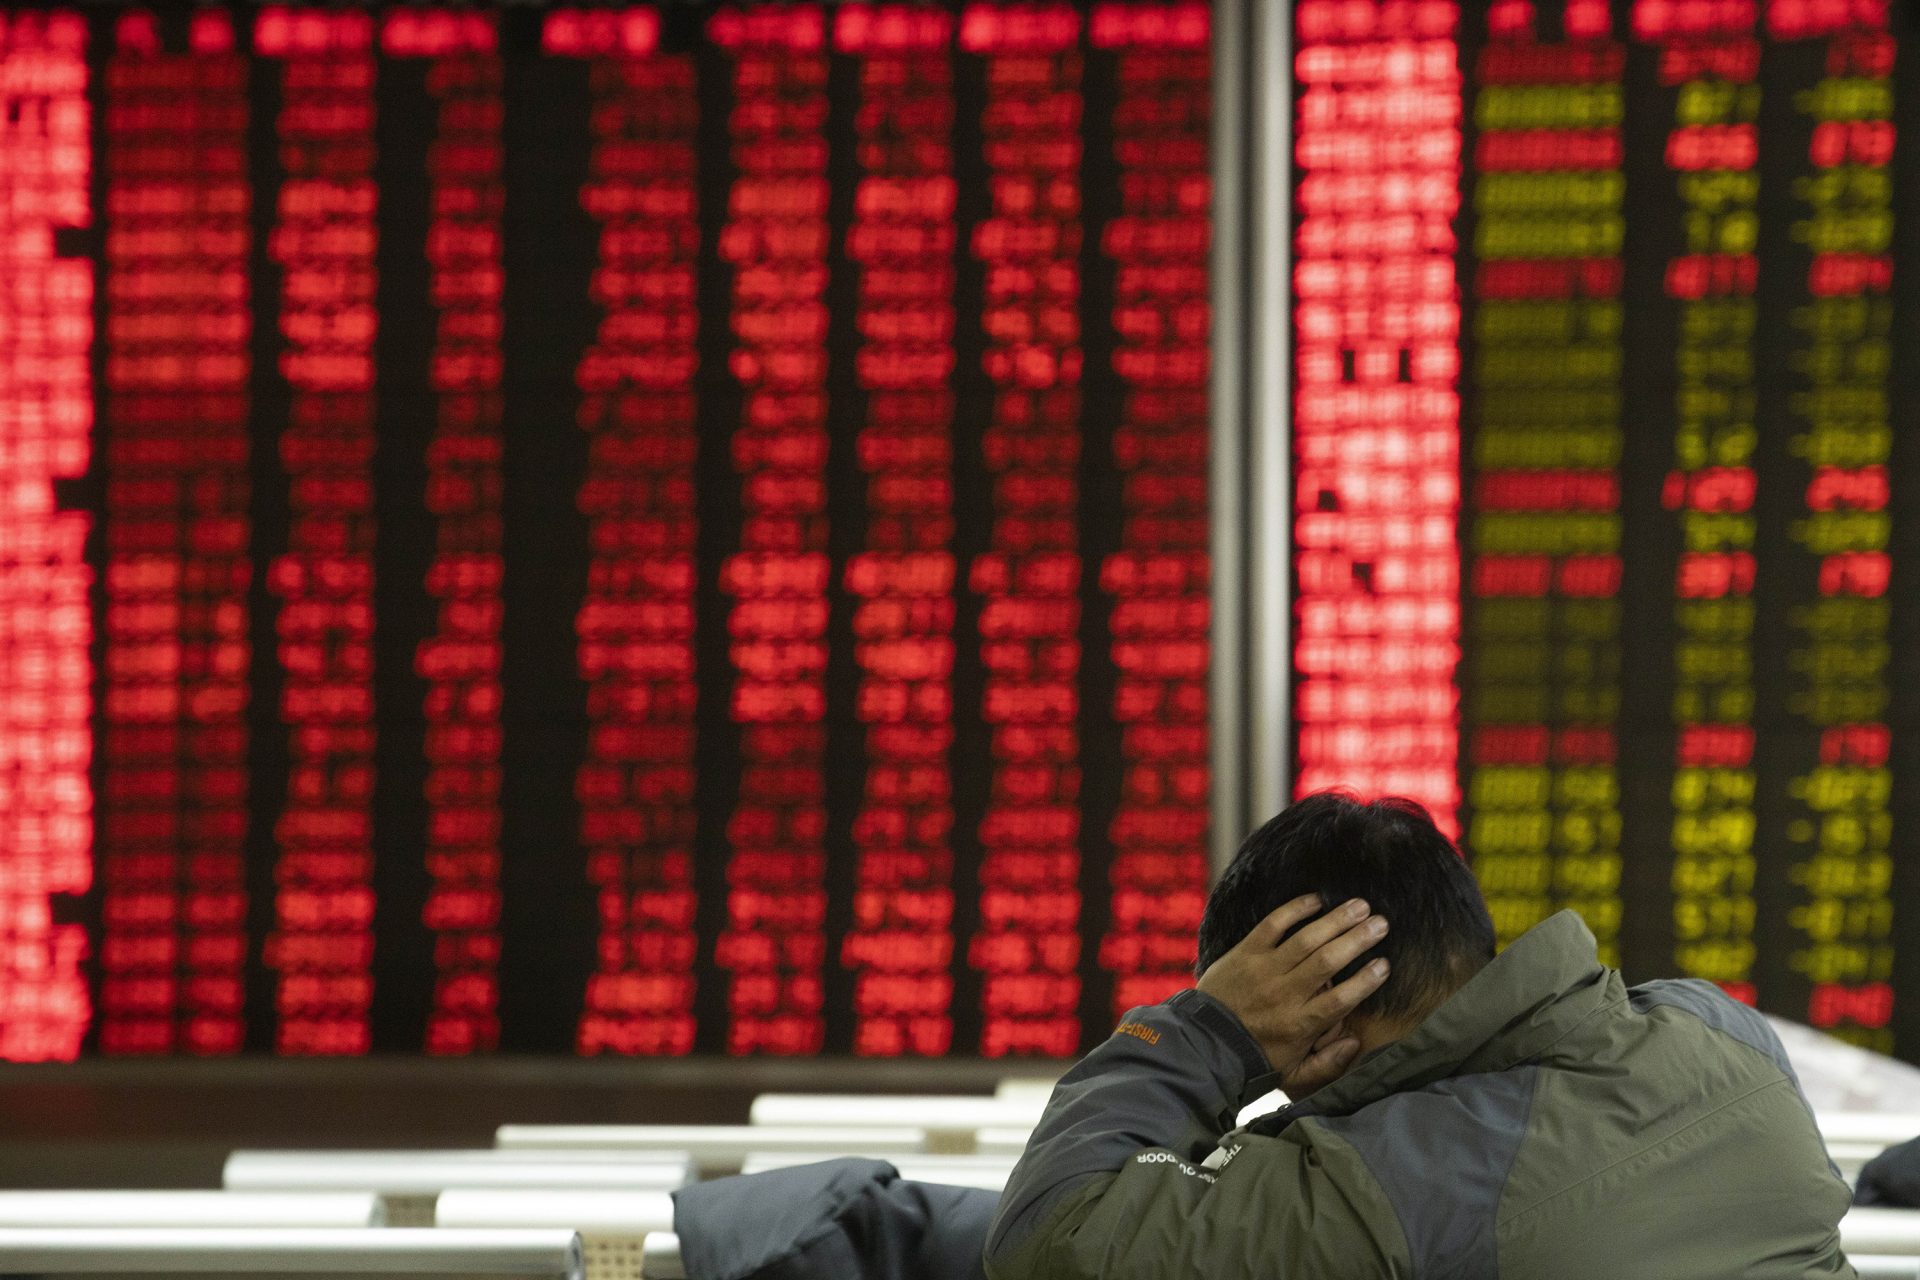 In this Thursday, Dec. 12, 2019, photo, an investor monitors stock prices at a brokerage in Beijing. Shares likewise jumped Friday, Dec. 13, 2019 in Asia following fresh all-time highs overnight on Wall Street spurred by optimism that the U.S. and China are close to reaching a deal to end their costly trade war.